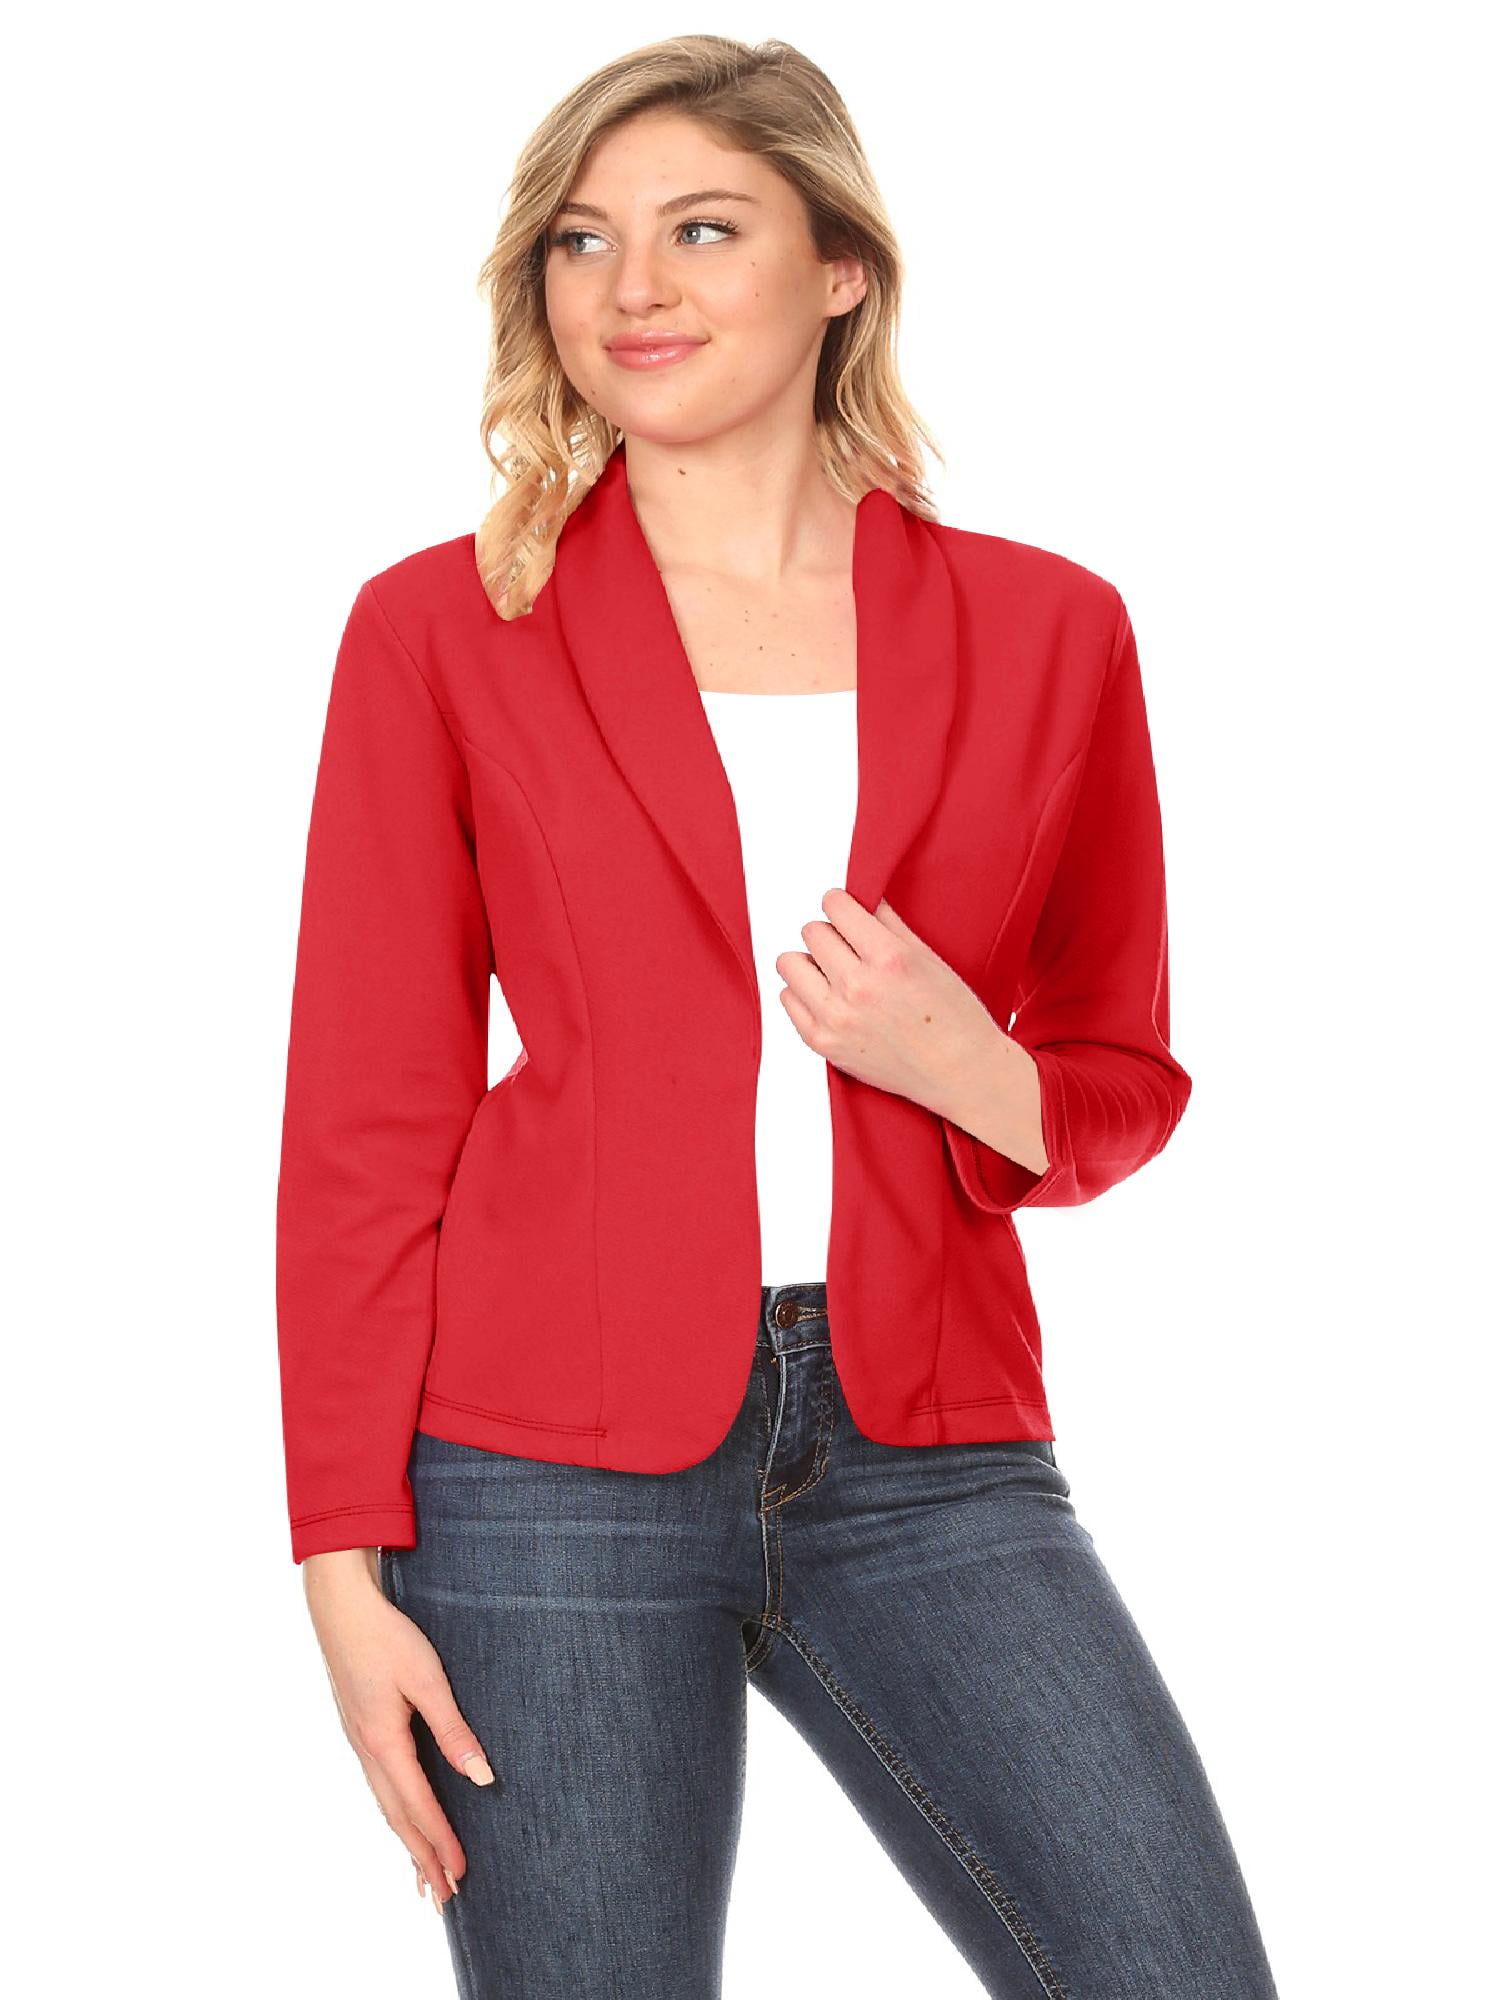 Moa Collection Women's Casual Bell Sleeves Open Front Solid Cardigan Jacket  Work Office Wear Blazer Made